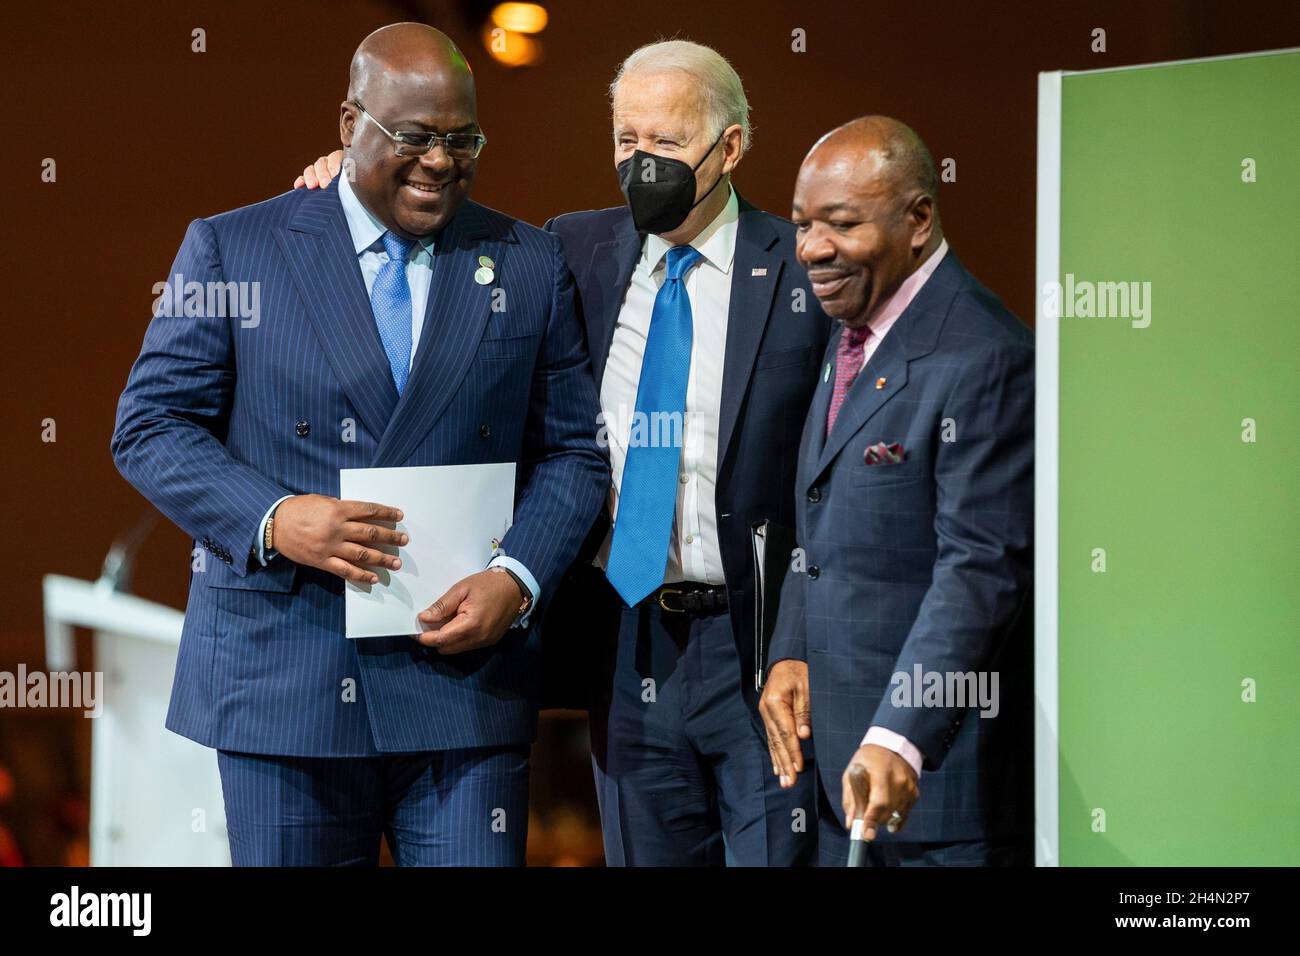 Glasgow, United Kingdom. 02nd Nov, 2021. U.S President Joe Biden chats with Democratic Republic of Congo President Felix Tshisekedi, left, and Central African Republic President Faustin-Archange Touadera, right, during the second day of the COP26 U.N. Climate Summit at the Glasgow Science Centre November 2, 2021 in Glasgow, Scotland. Credit: Adam Schultz/White House Photo/Alamy Live News Stock Photo